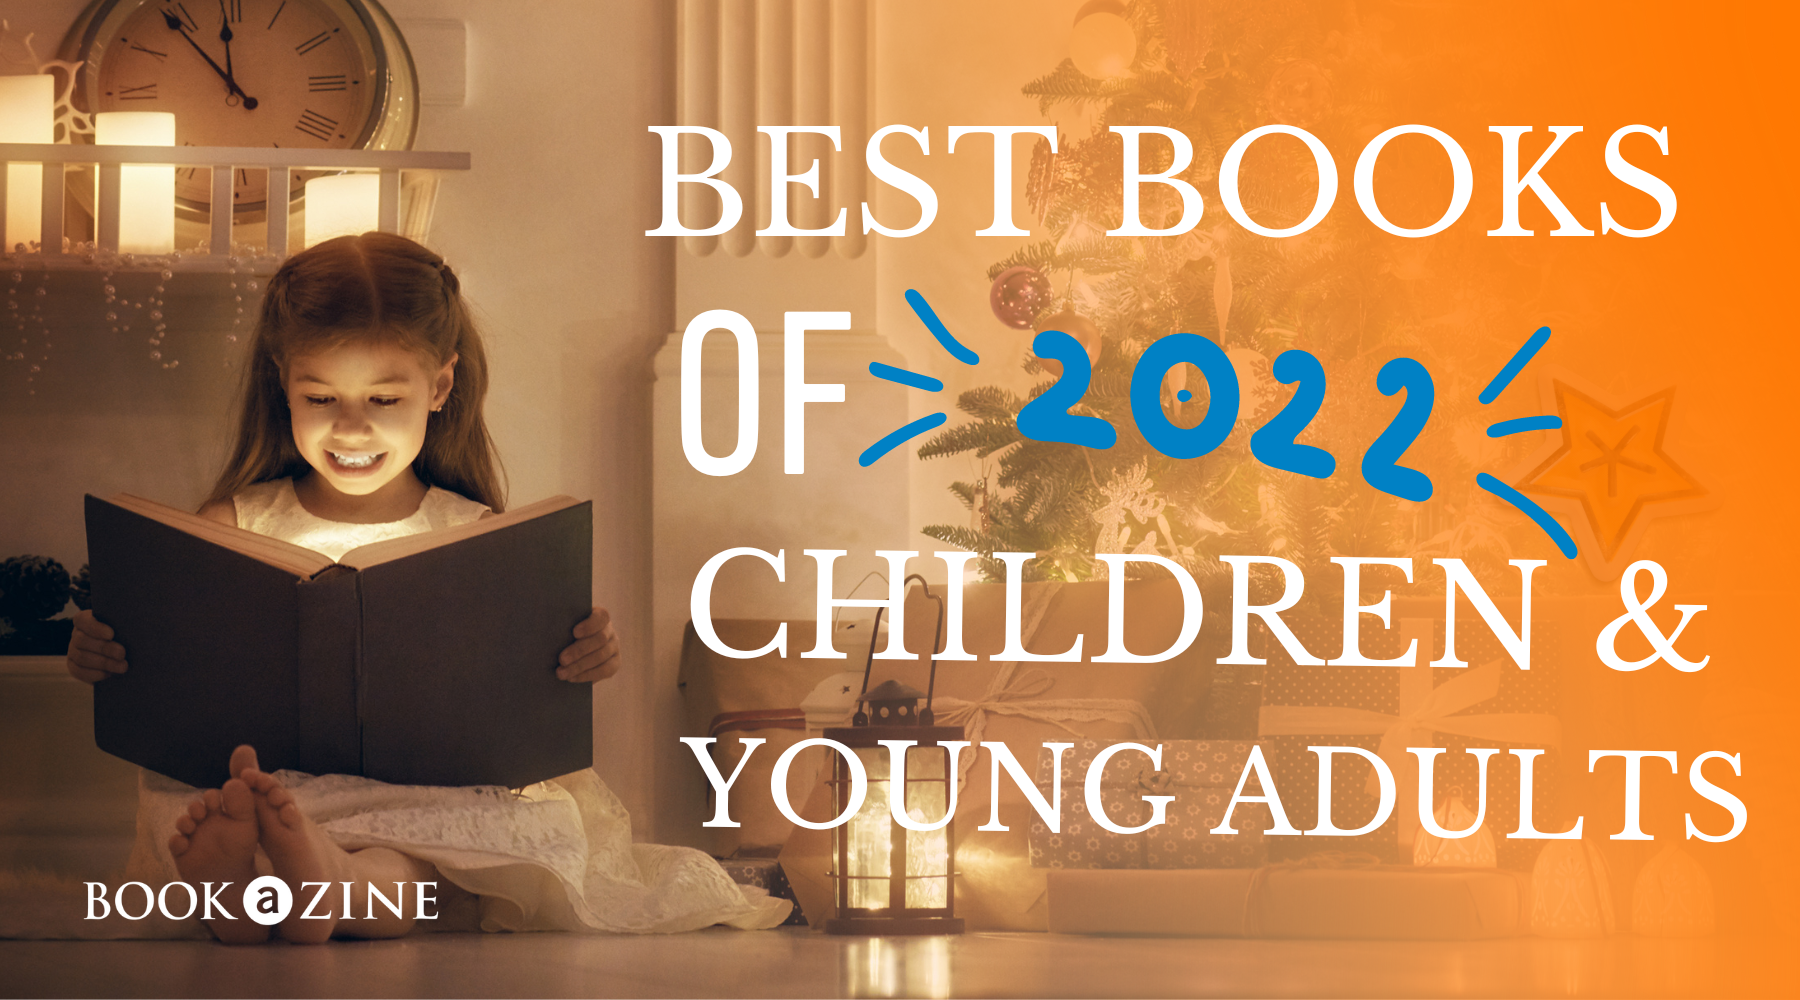 Best Books of 2022 for Children & Young Adults